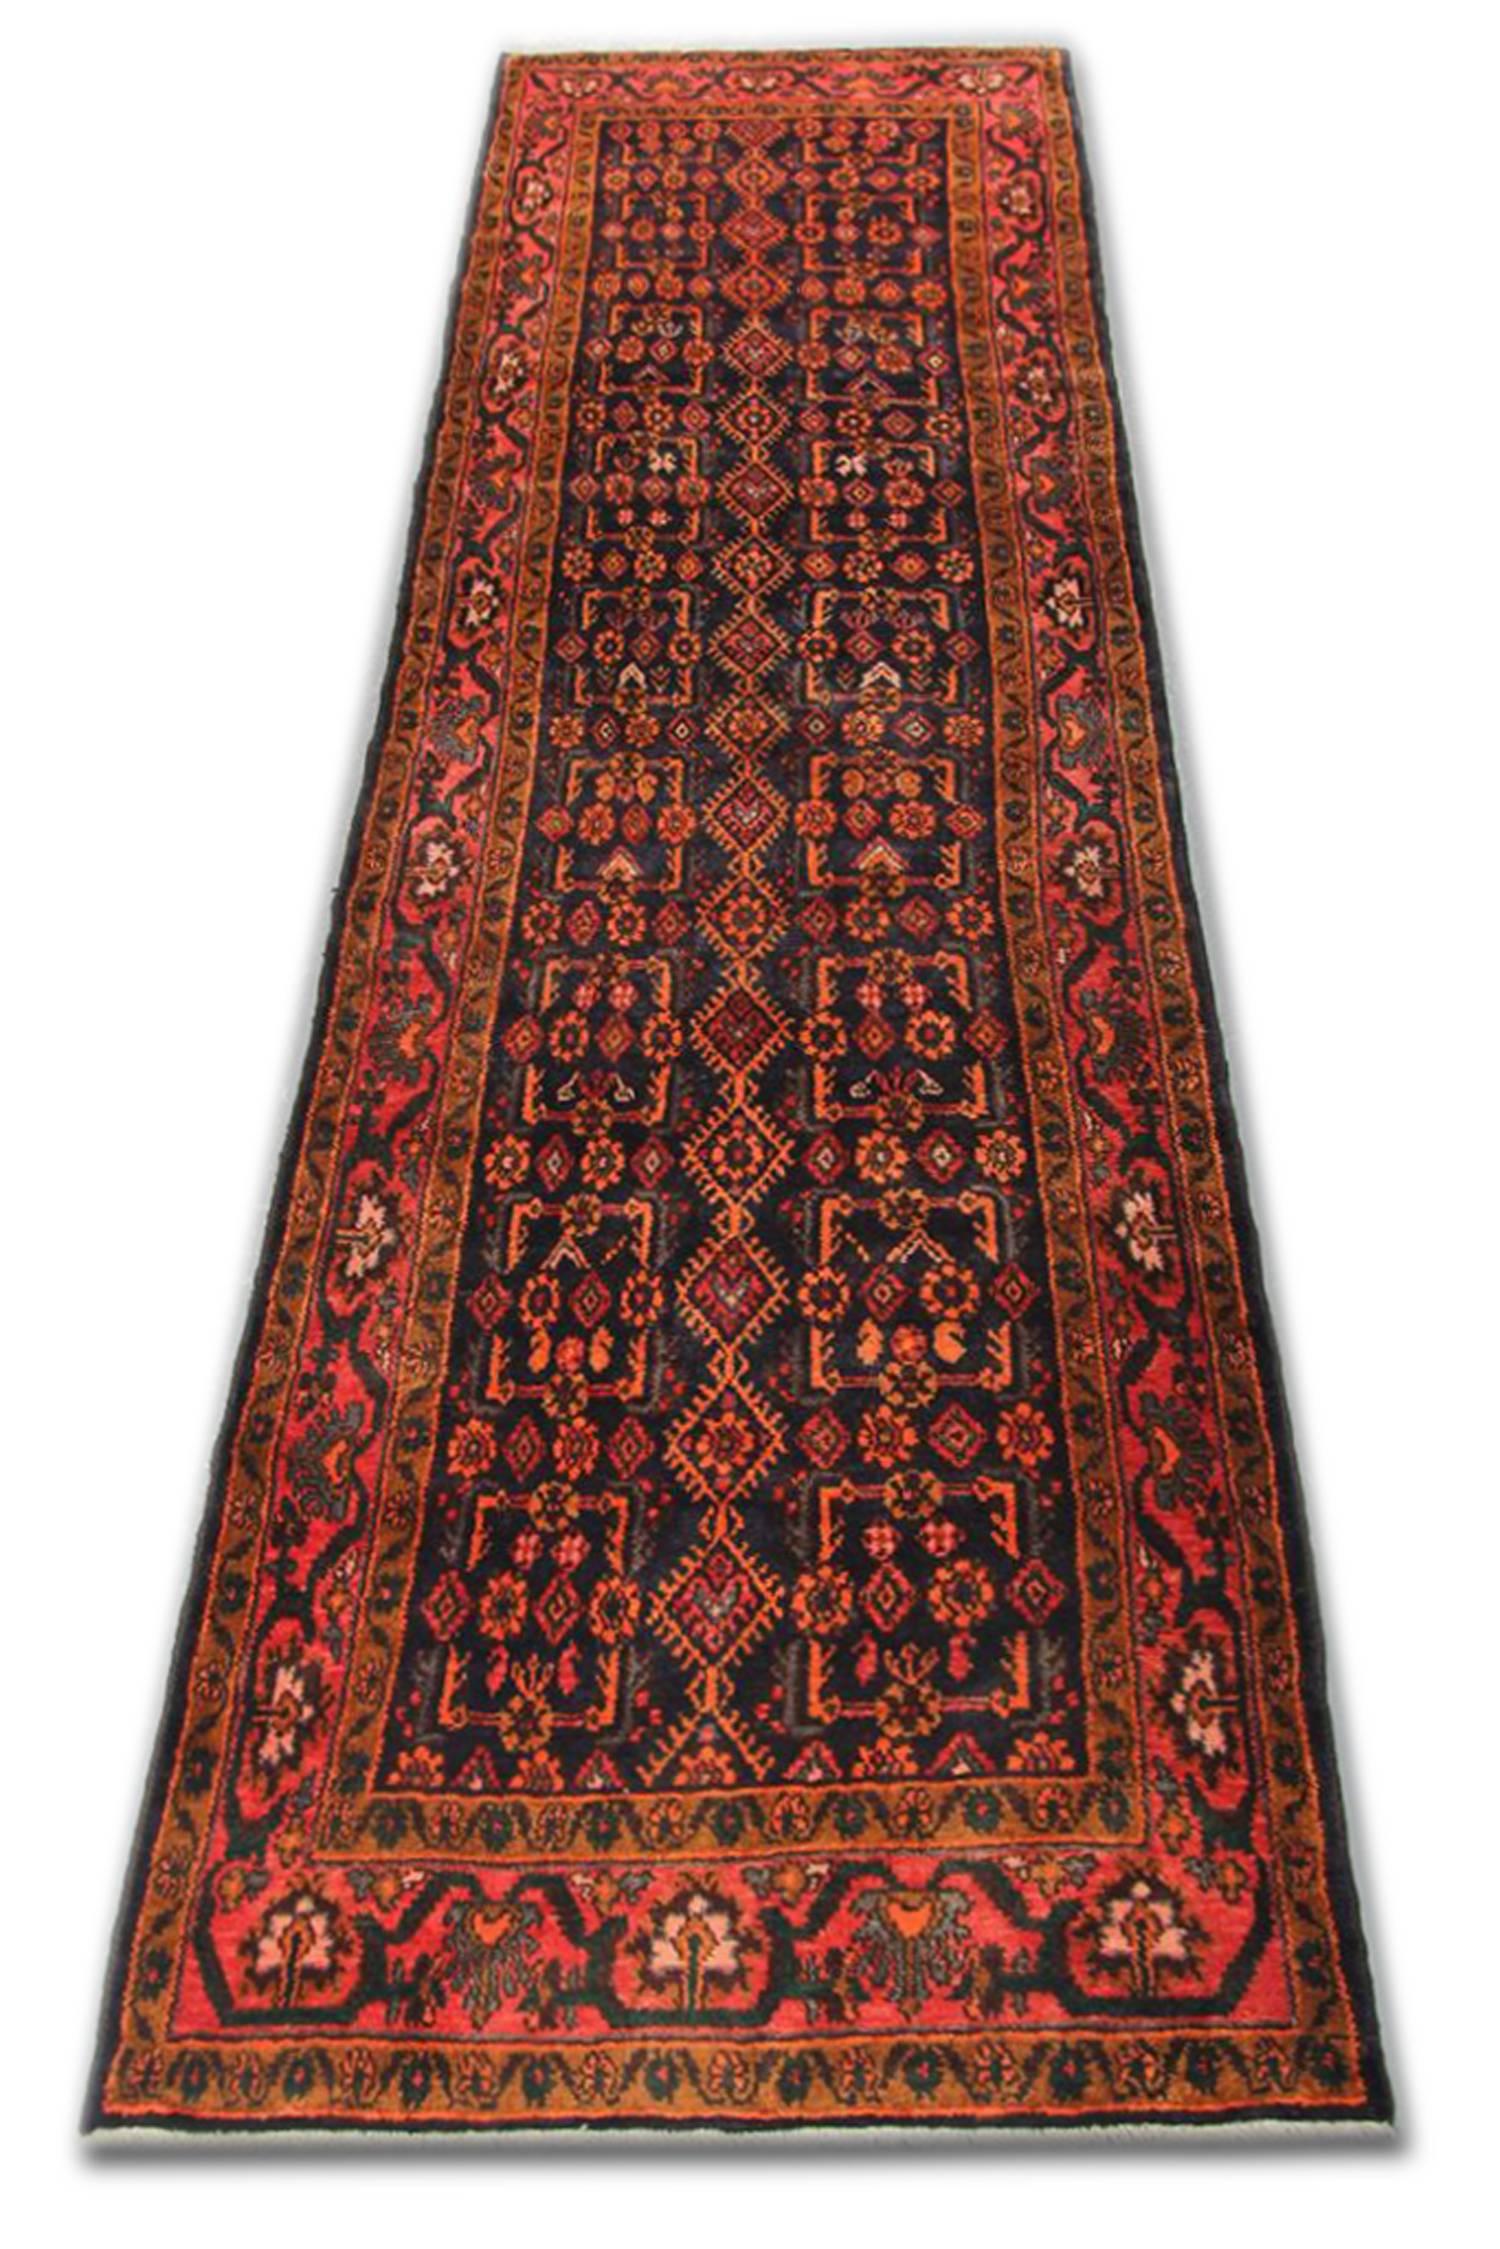 Traditional Oriental runner rug, handwoven wool carpet runner.
This elegant wool runner rug was woven by hand in the 1950s. The central design has been intricately woven with diamonds and motifs symmetrically placed on dark background in colors of